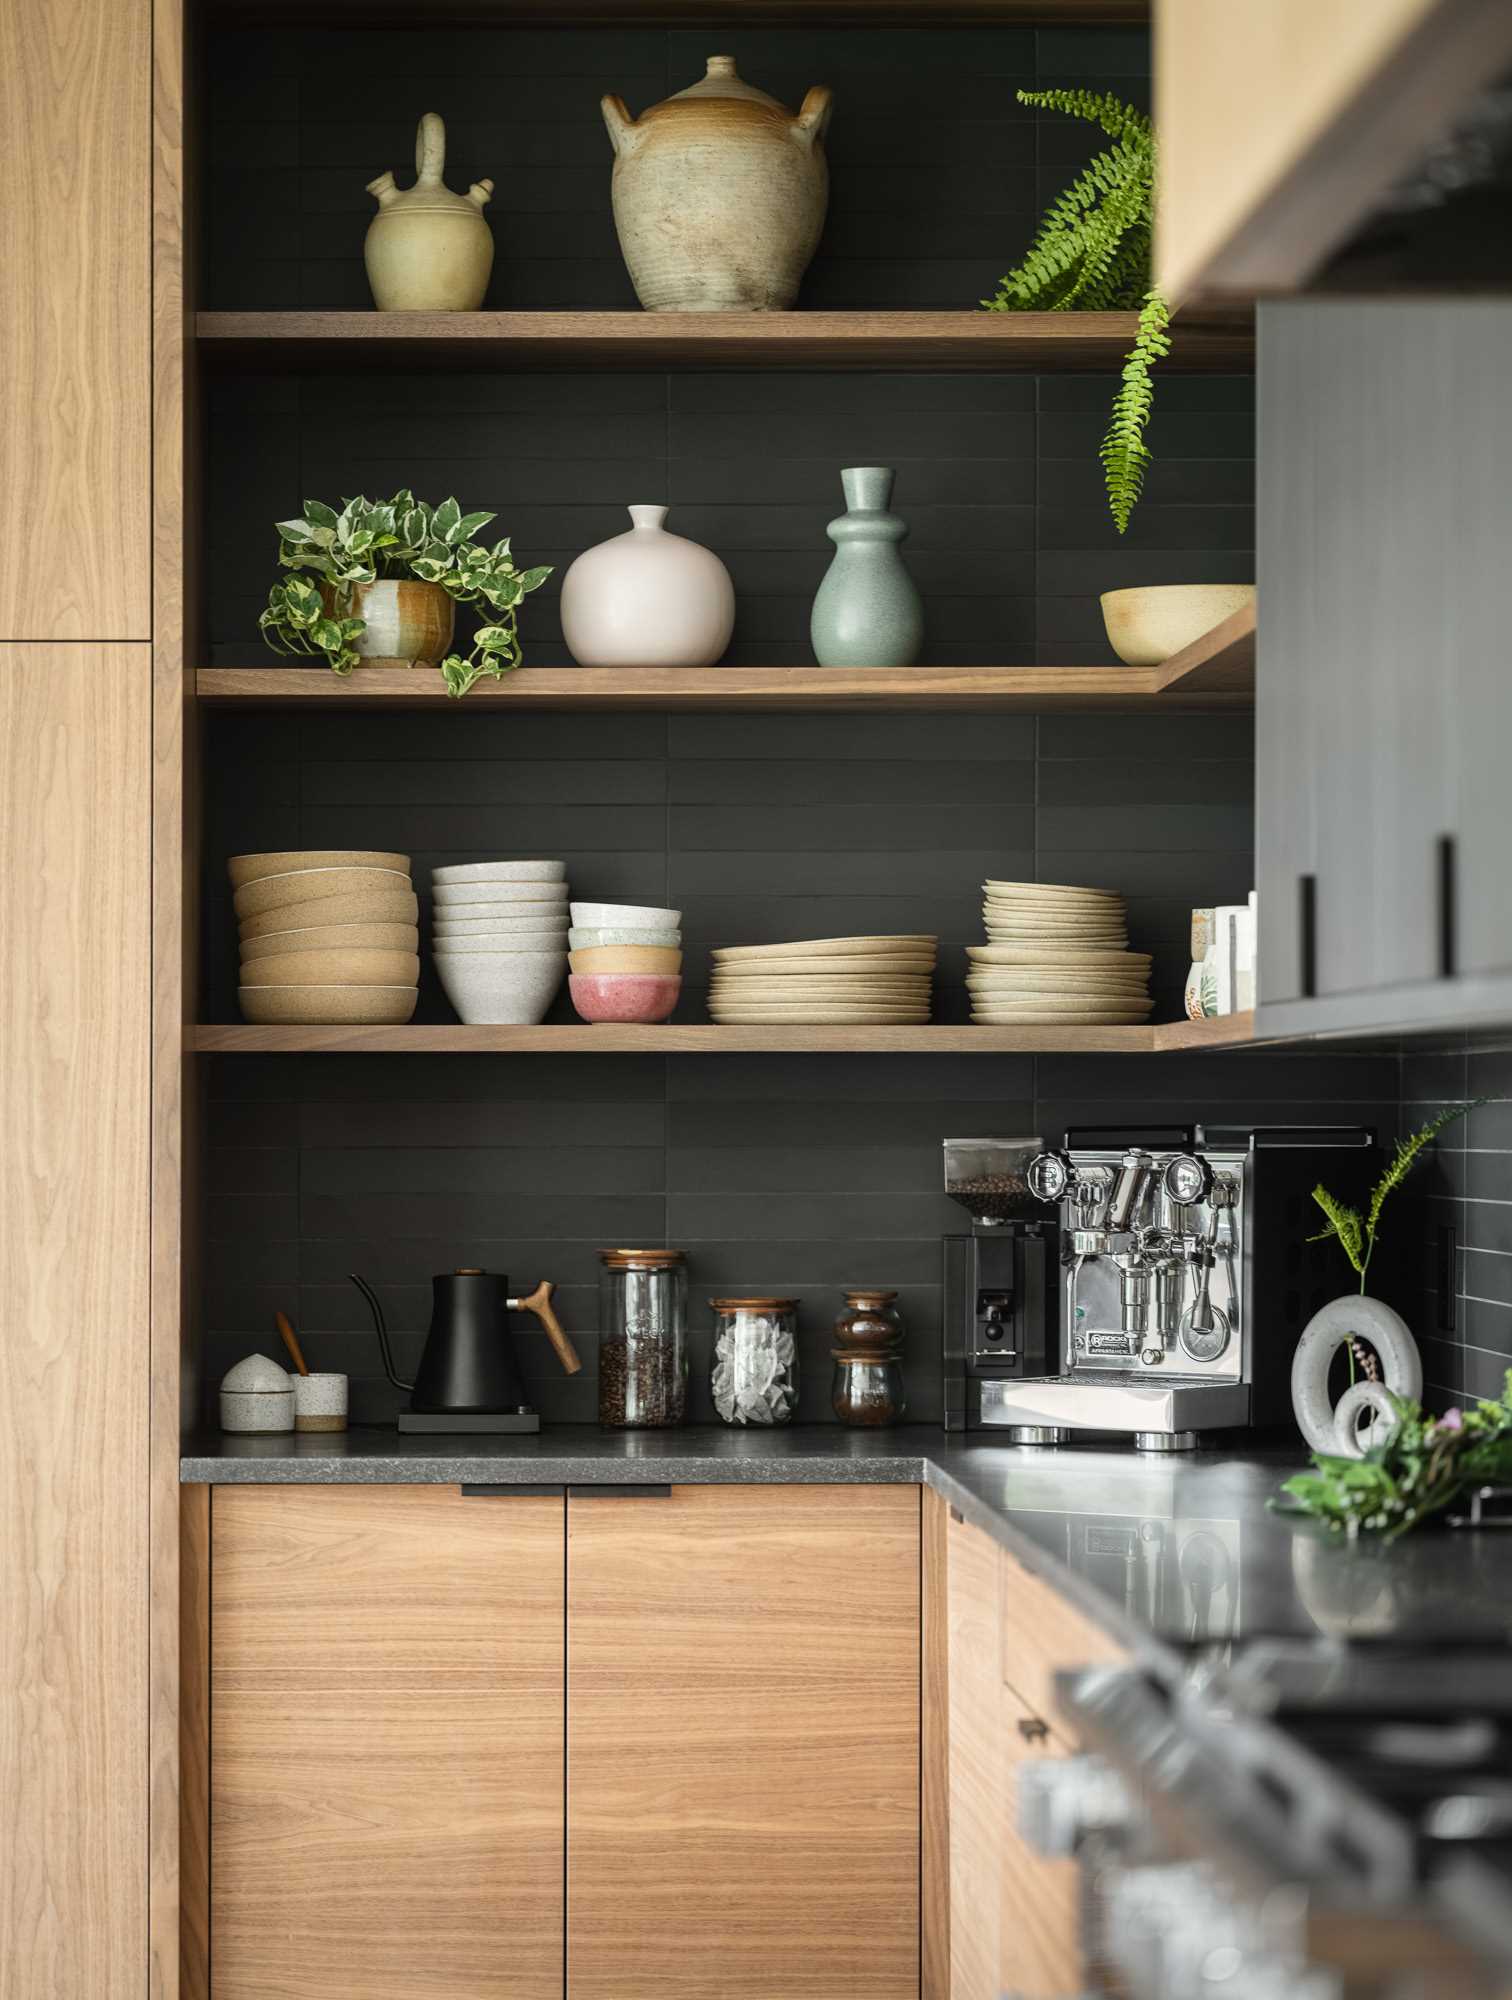 A modern kitchen with wood cabinets, open corner shelves, and black rectangular tiles.